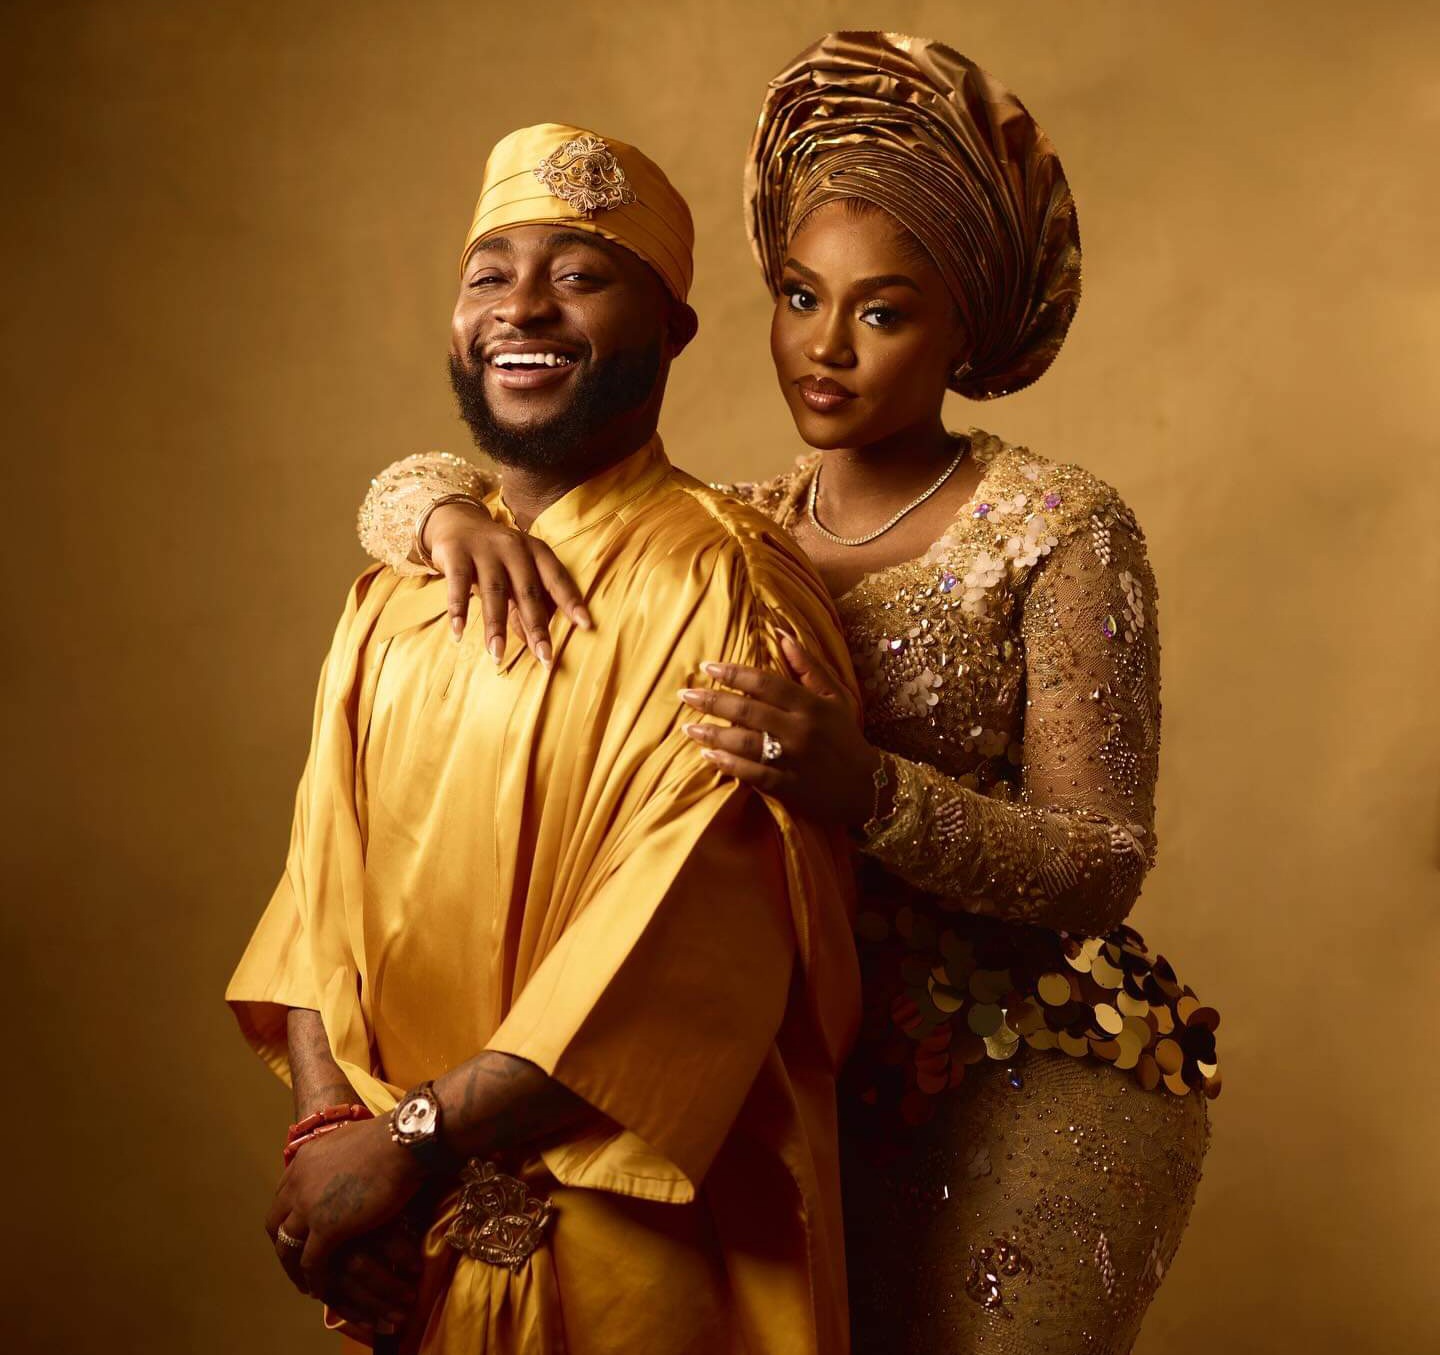 Nigerian singer, songwriter, and record producer David Adeleke, popularly known as Davido, don share pre-wedding photos with his partner, Chioma Rowland.